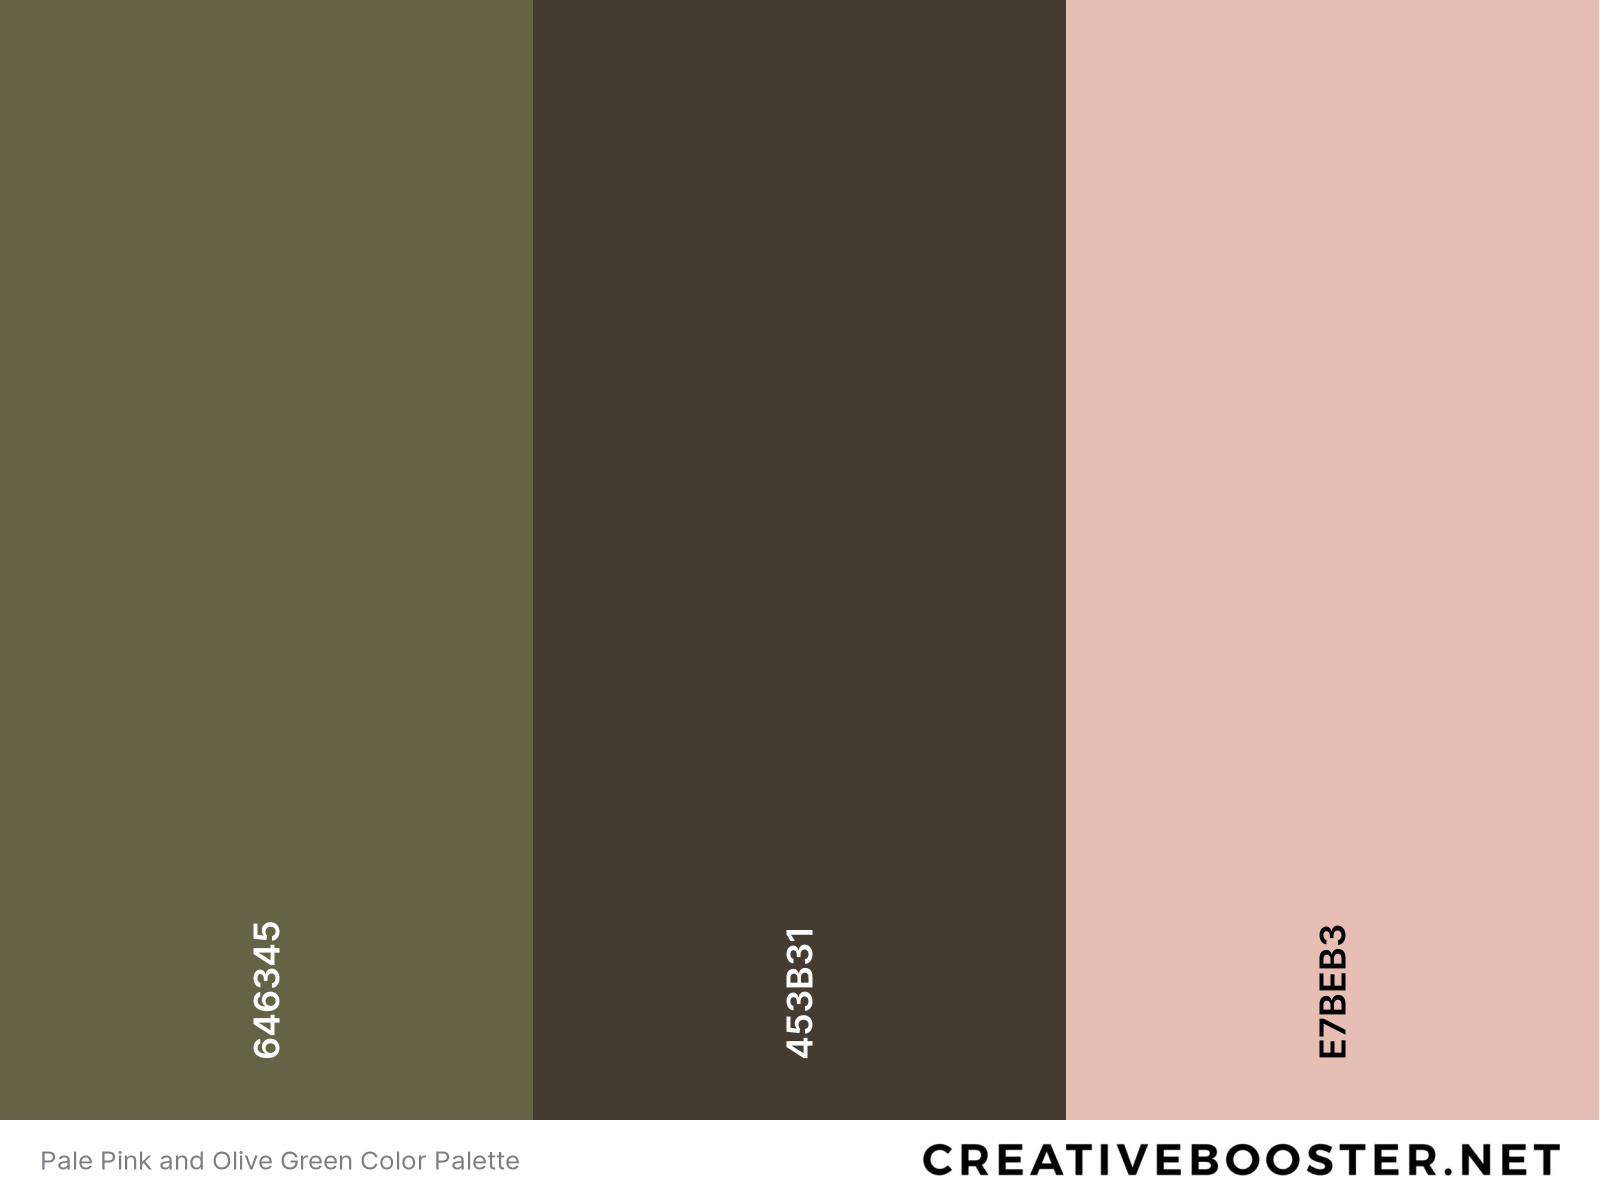 Pale Pink and Olive Green Color Palette